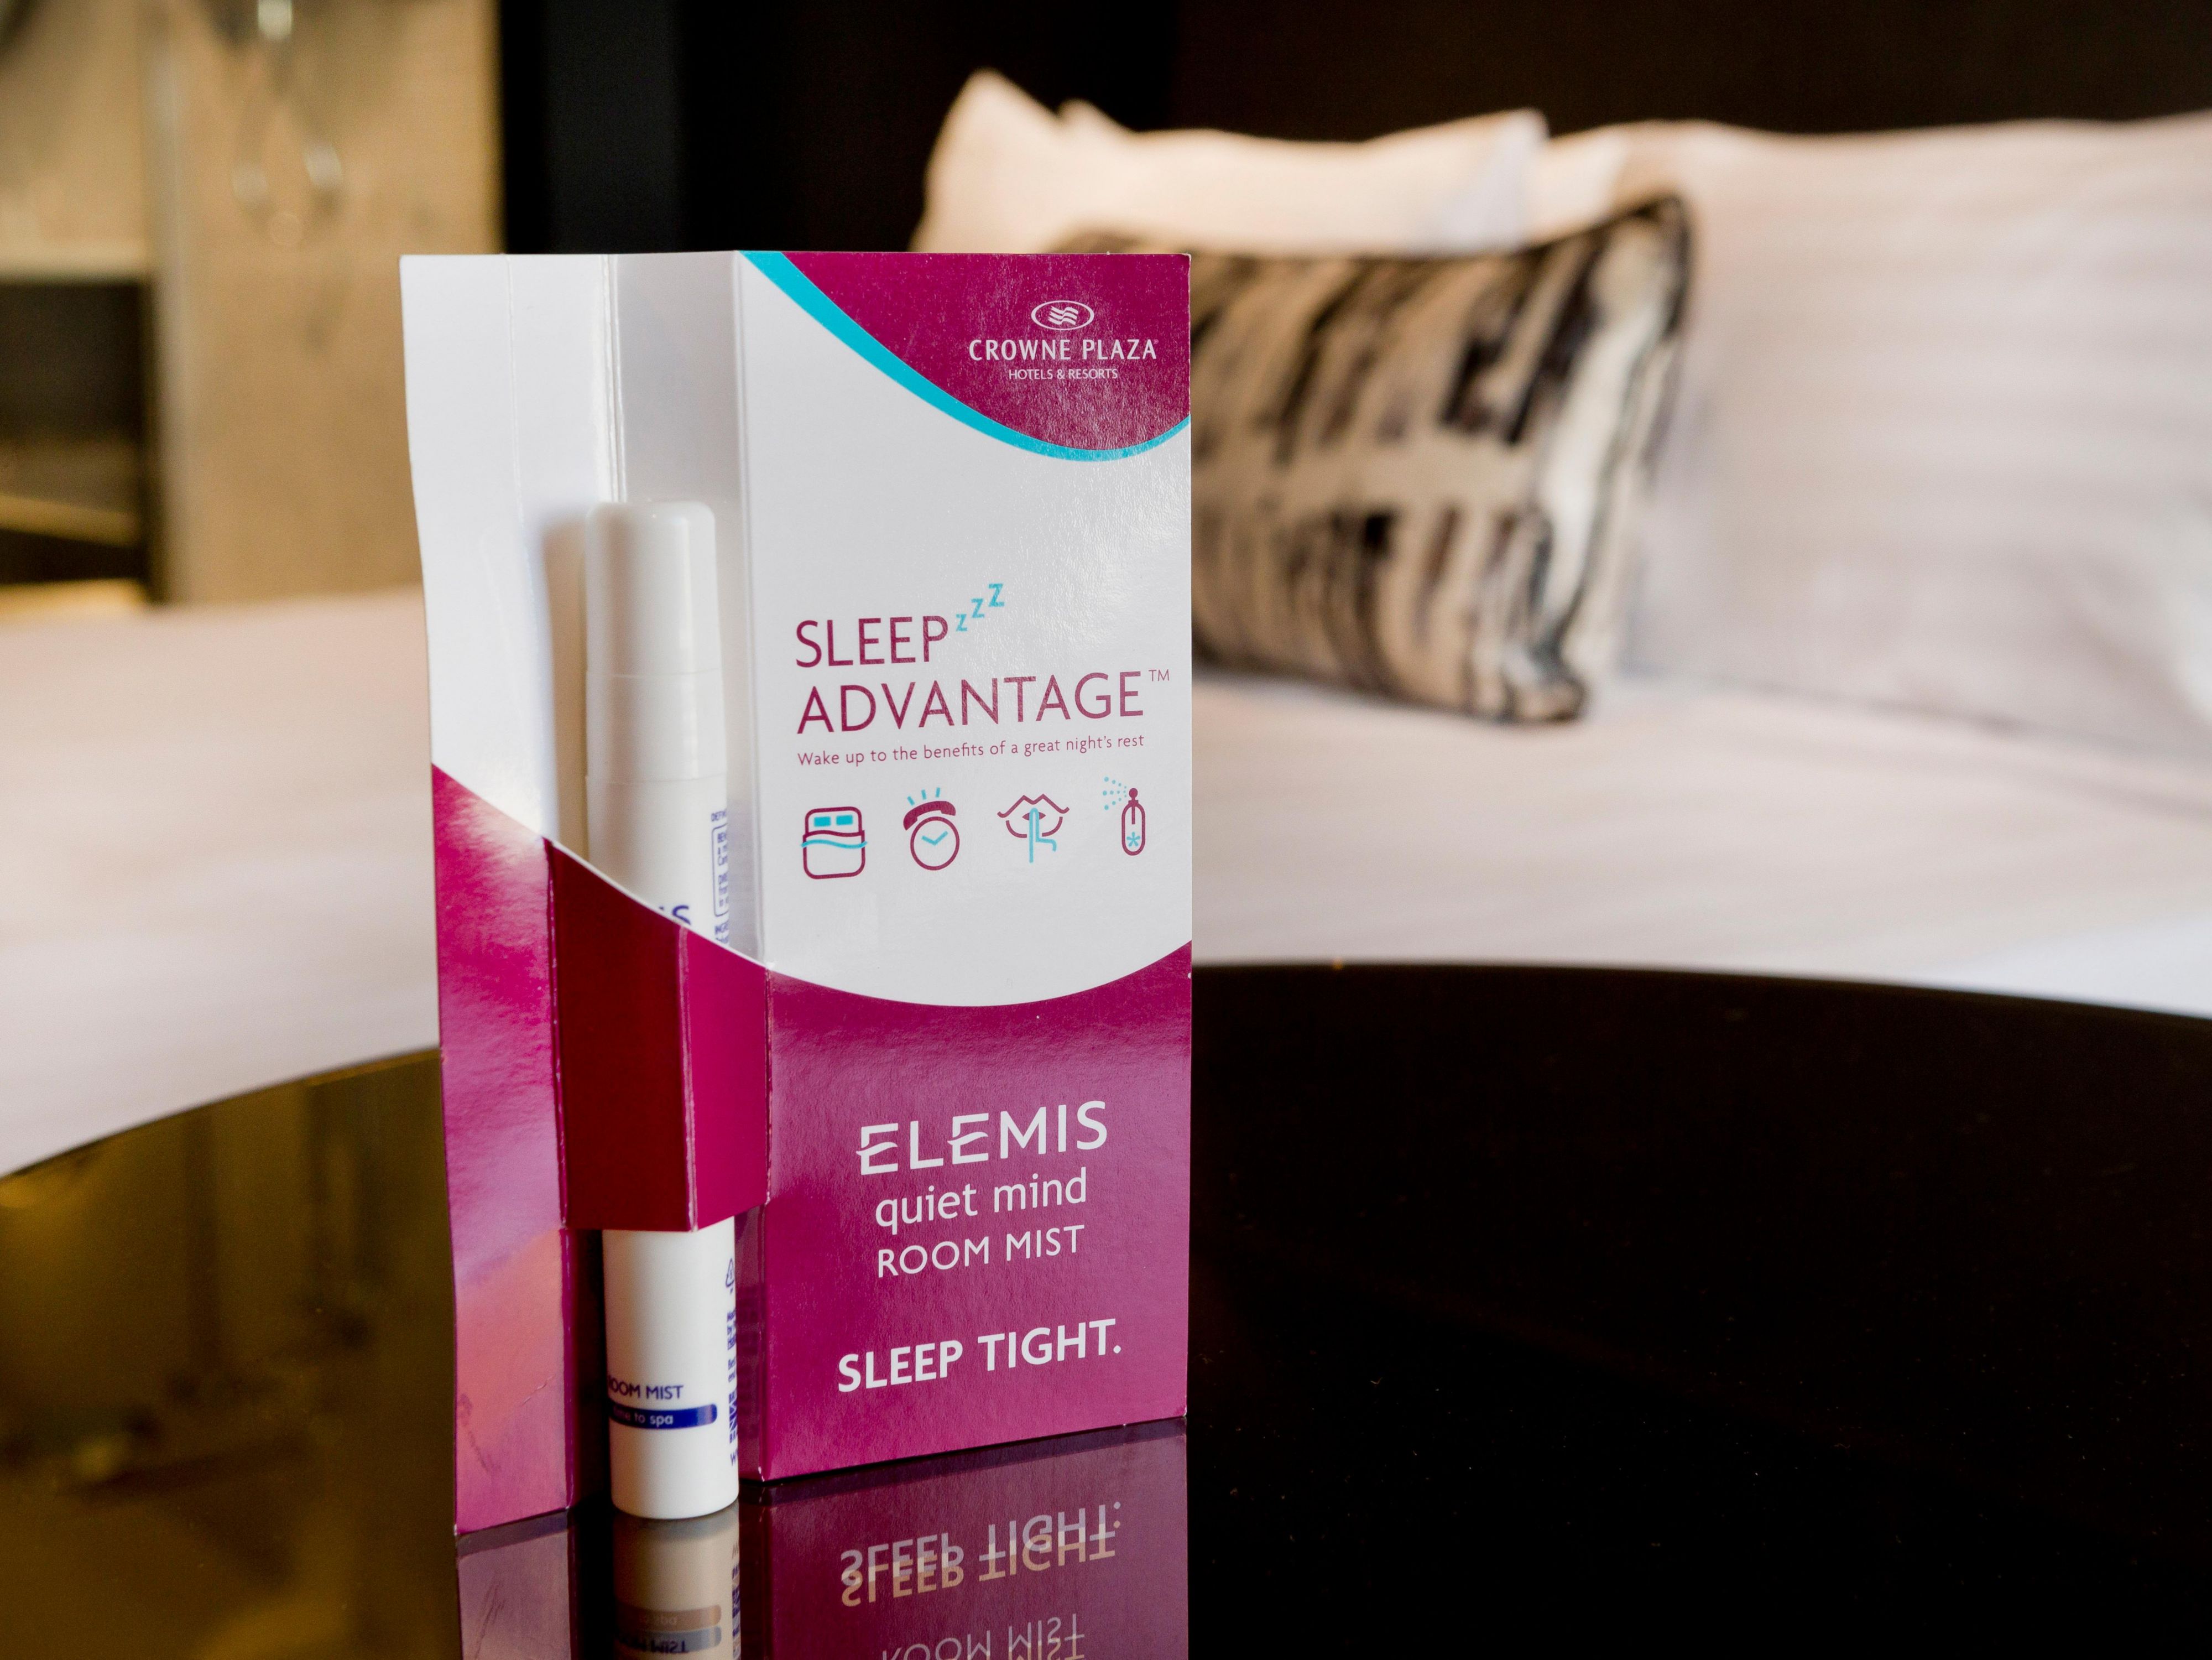 Key components of a well-rested stay are comfortable premium bedding, aromatherapy, quiet zones and a guaranteed wake-up call. Sleep Advantage™ offers them all in one package to help soothe and comfort the mind.